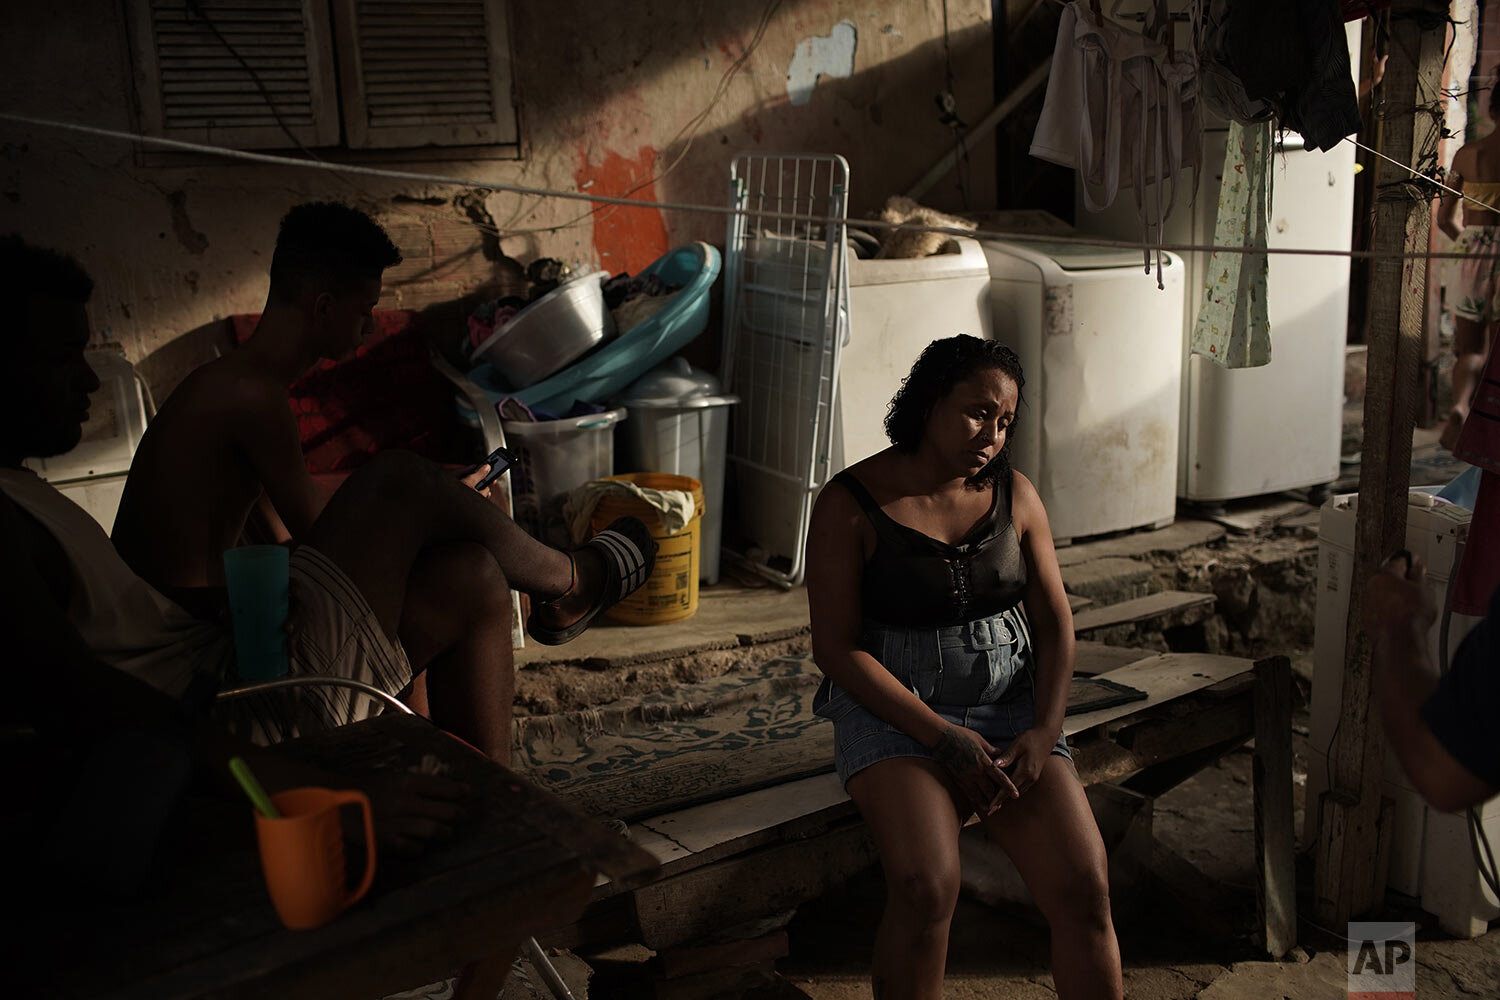  Manicurist and mother of seven children Leticia Machado, who is jobless due to the novel coranvirus pandemic, sits on a bench in her home during the new coronavirus pandemic, at the Turano favela, in Rio de Janeiro, Brazil, April 15, 2020. (AP Photo